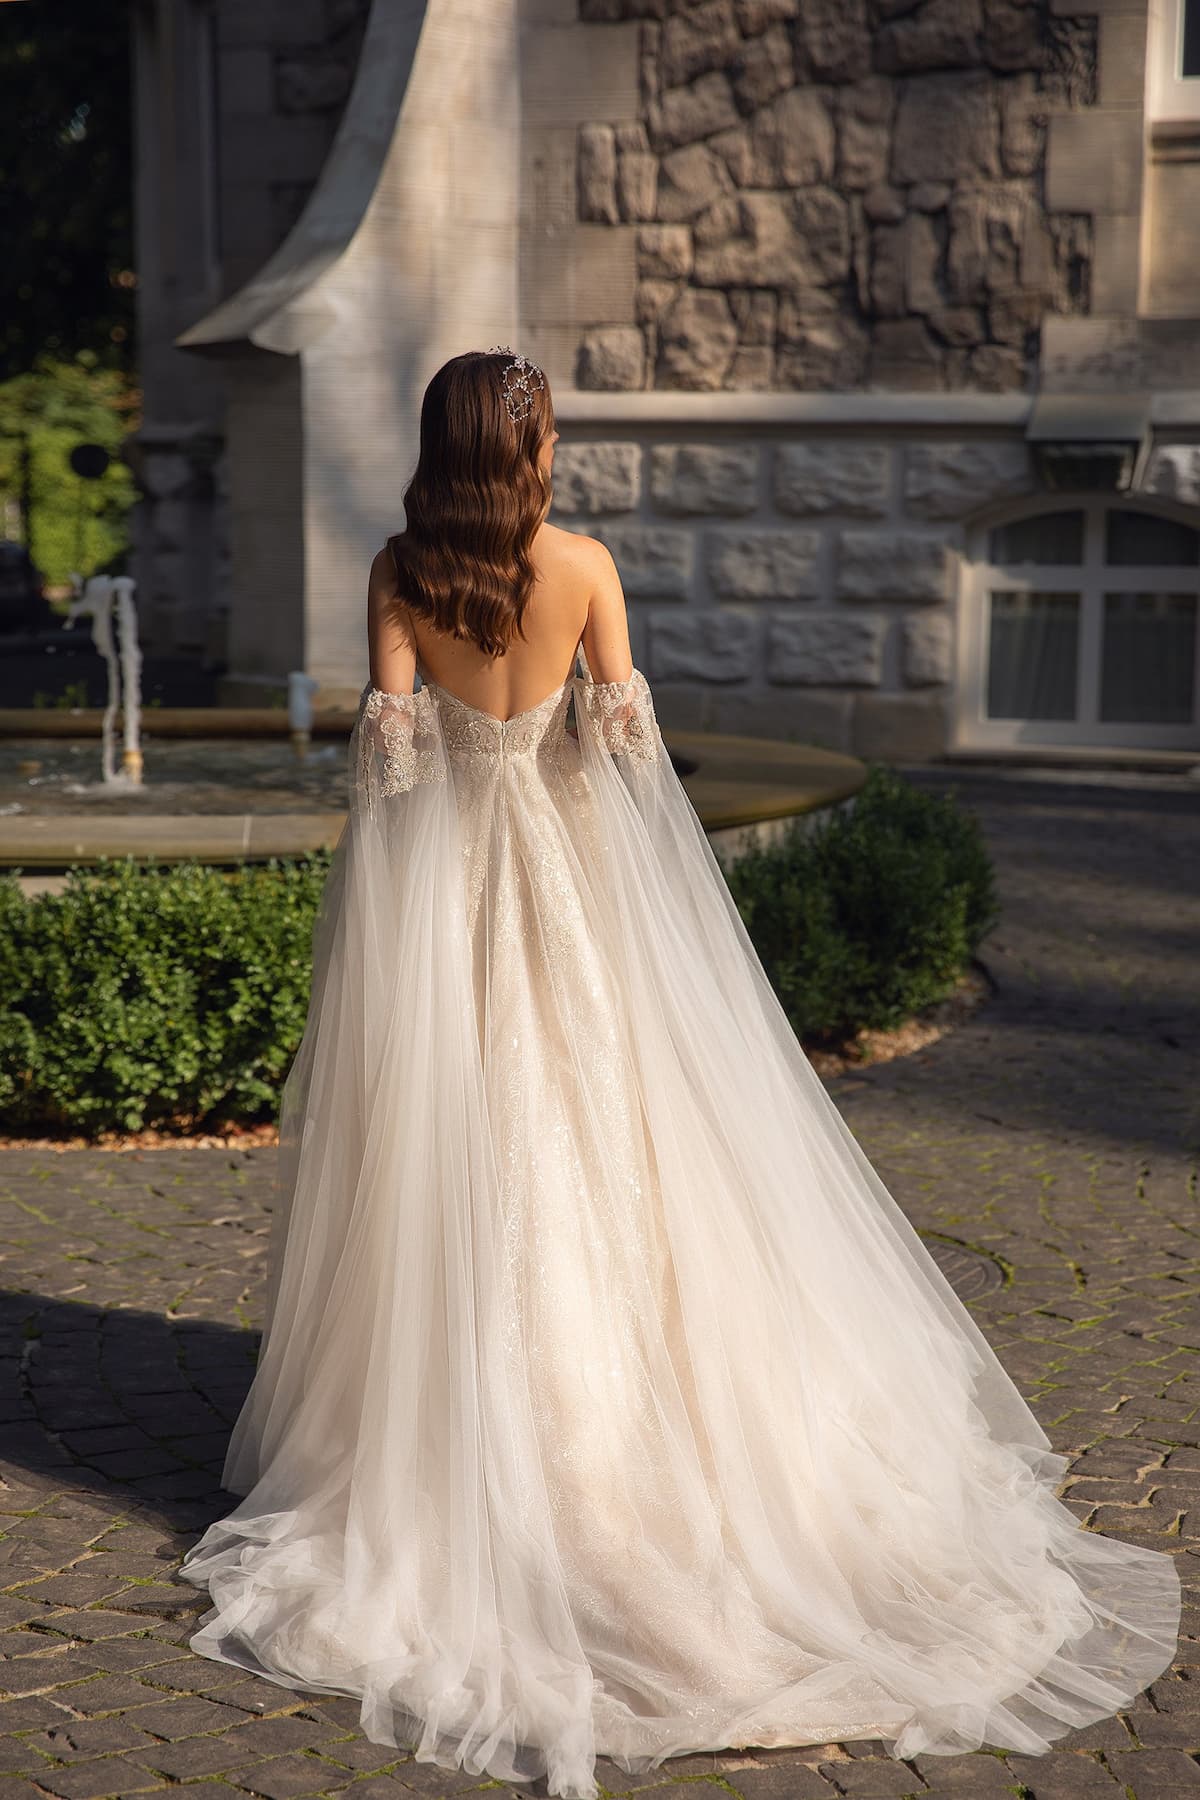 Wedding dress 5300 Product for Sale at NY City Bride